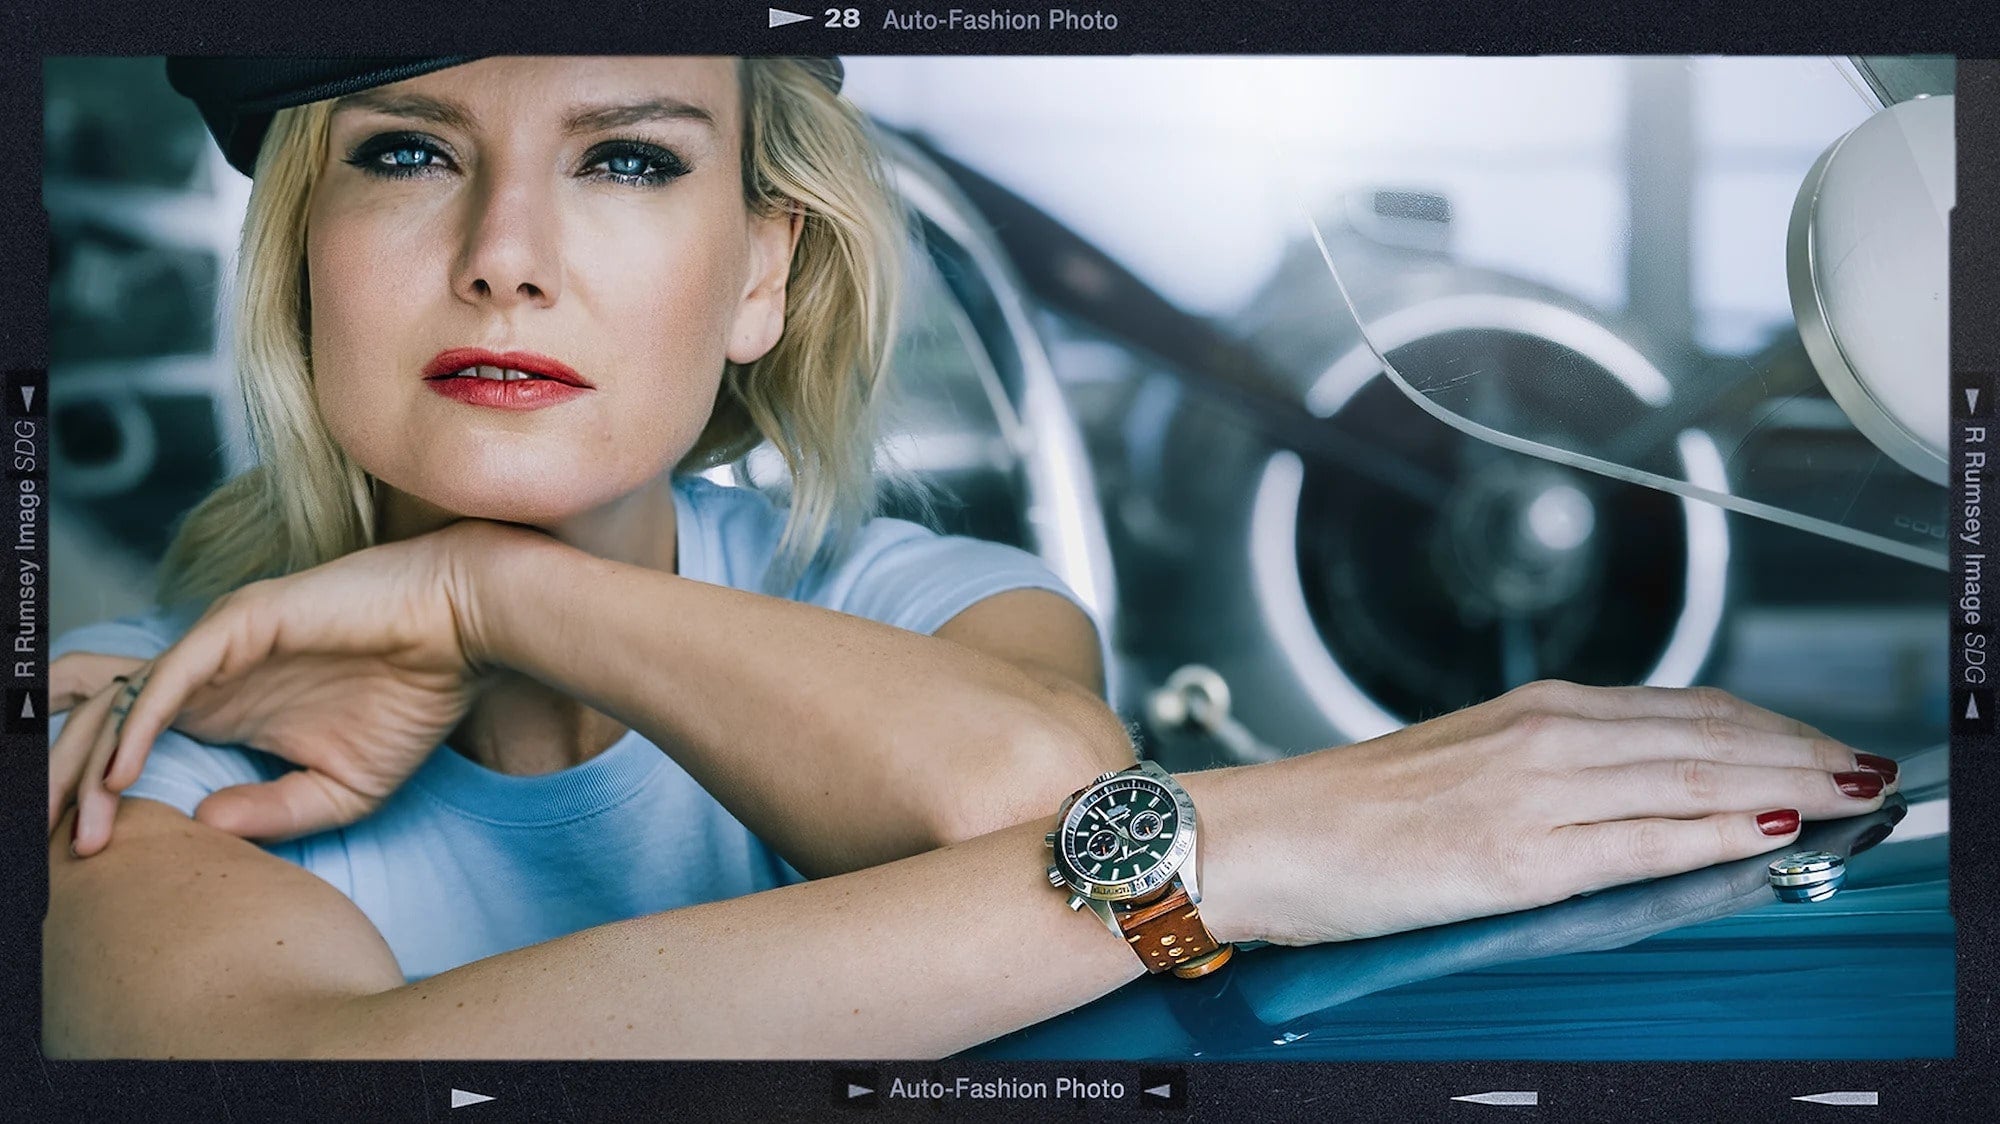 Eugenia Kuzmina posing with her head resting on her left wrist and right arm resting on the 427 SC sporting a Jordan timepiece